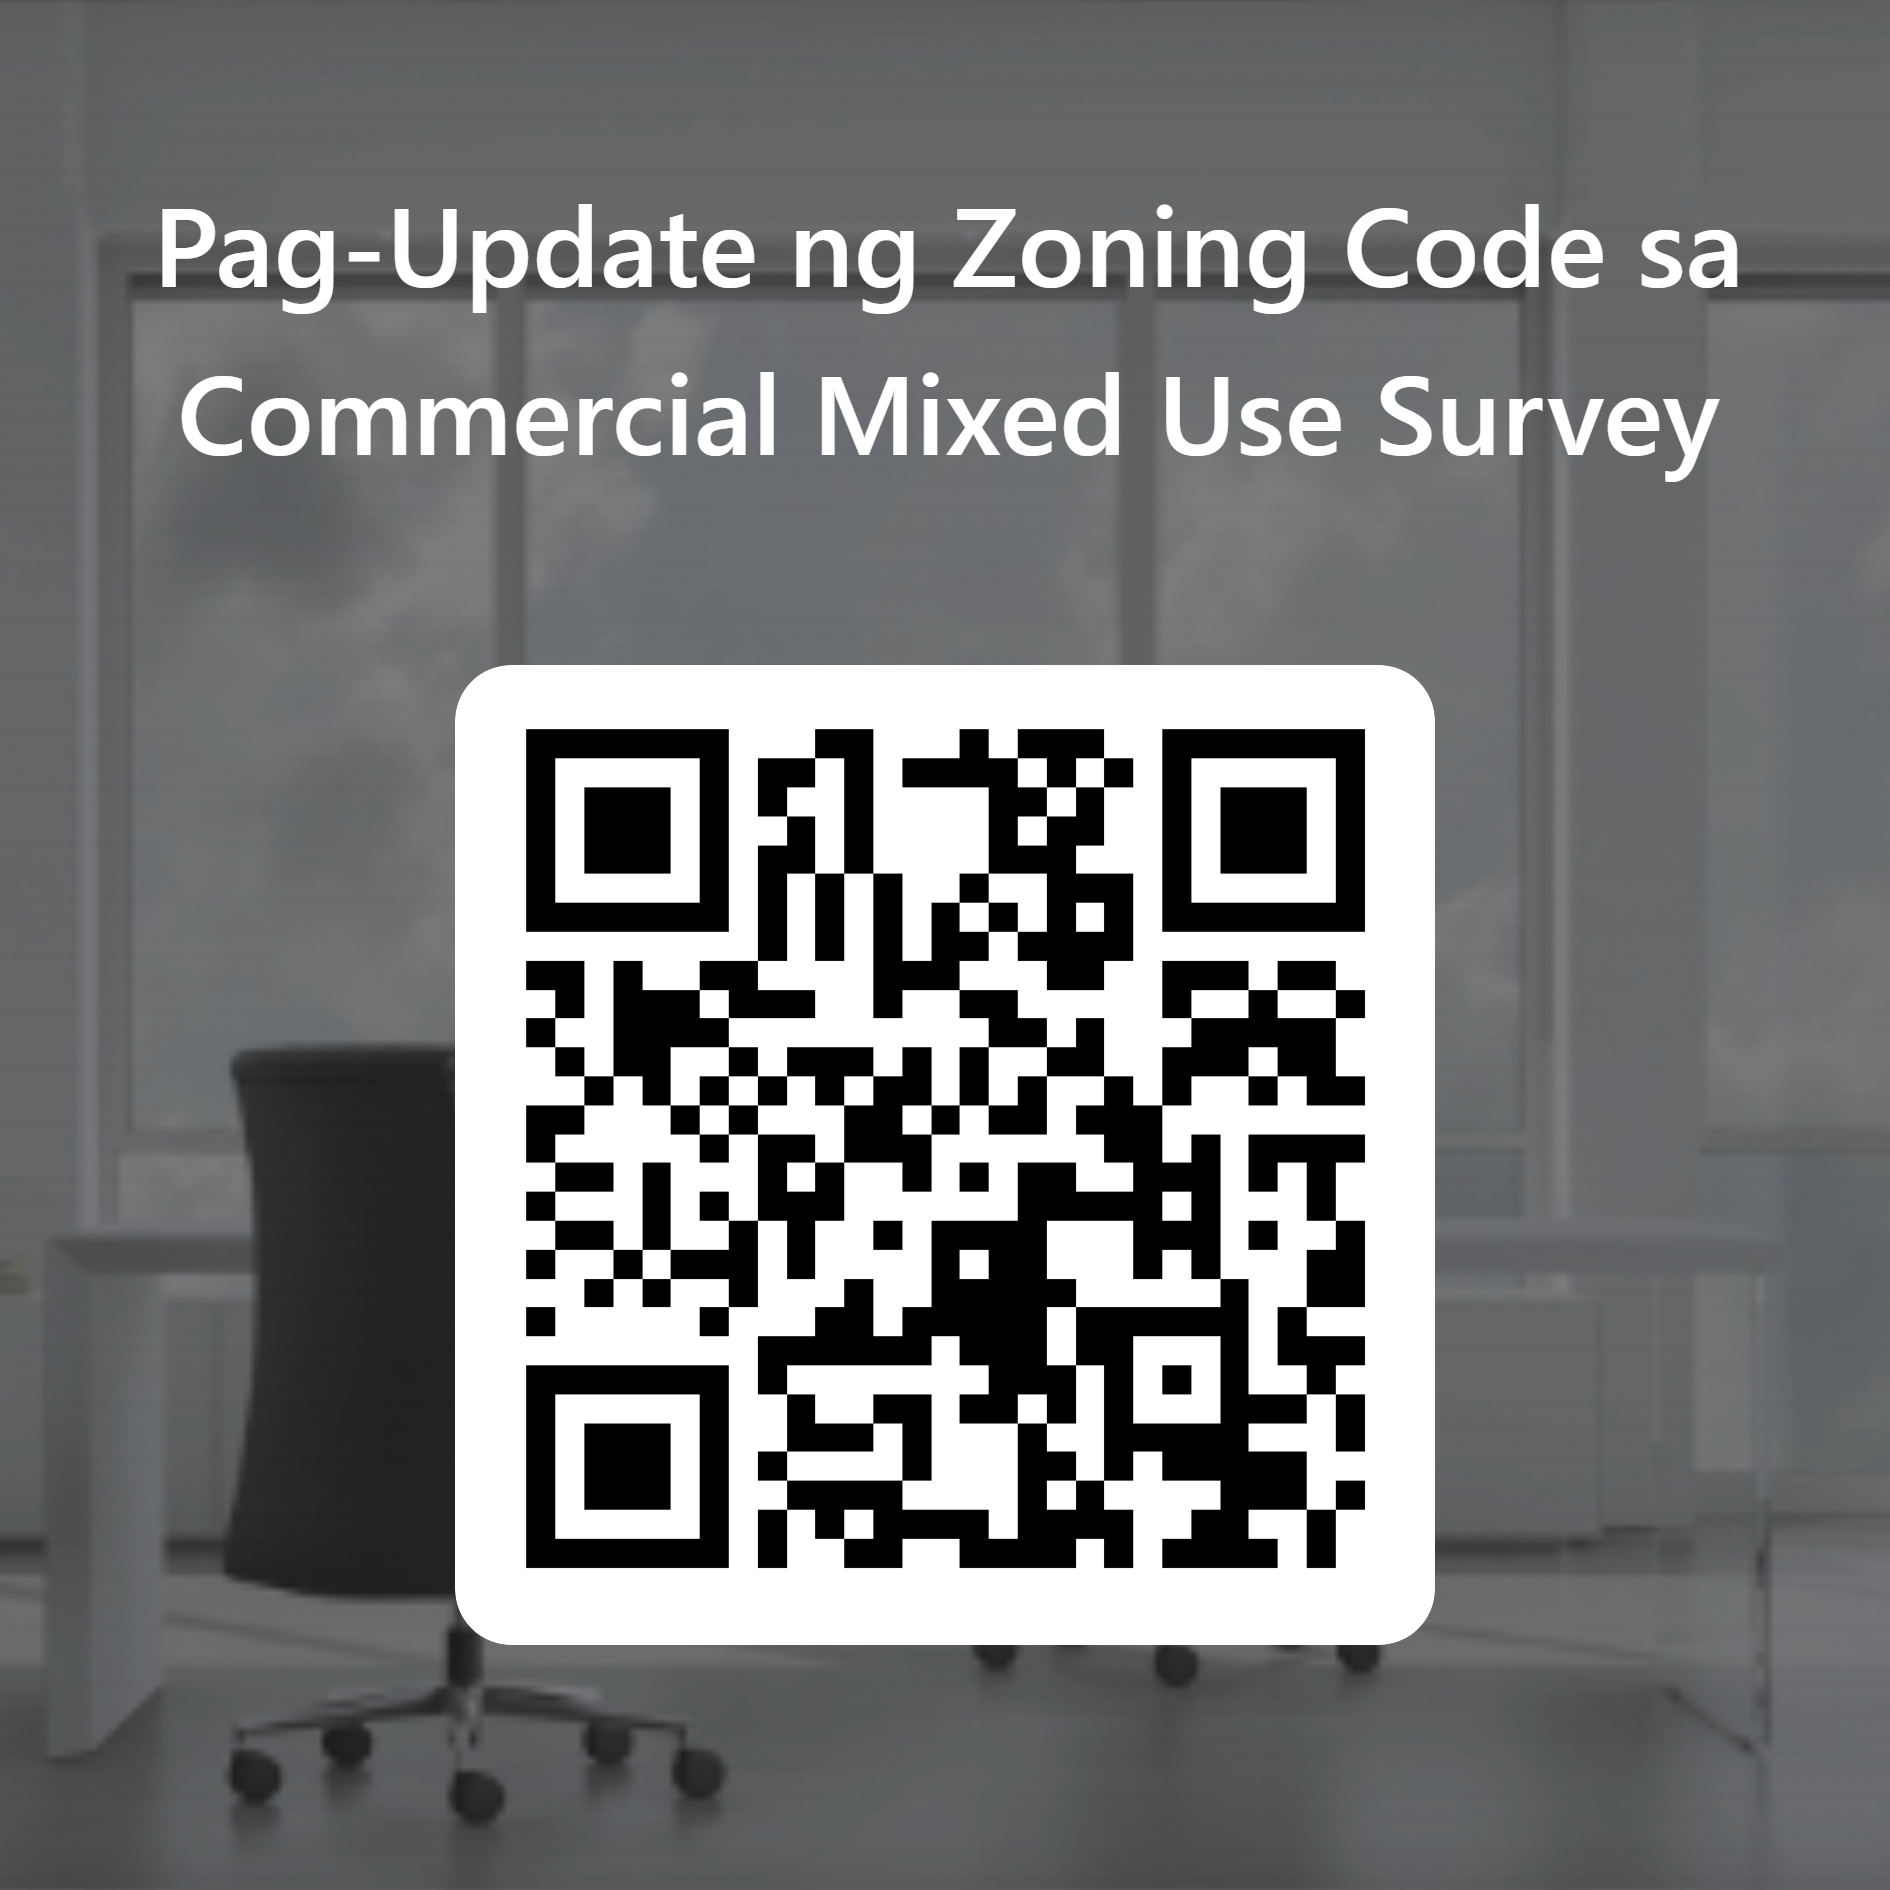 QR Code for Survey in Tagalog